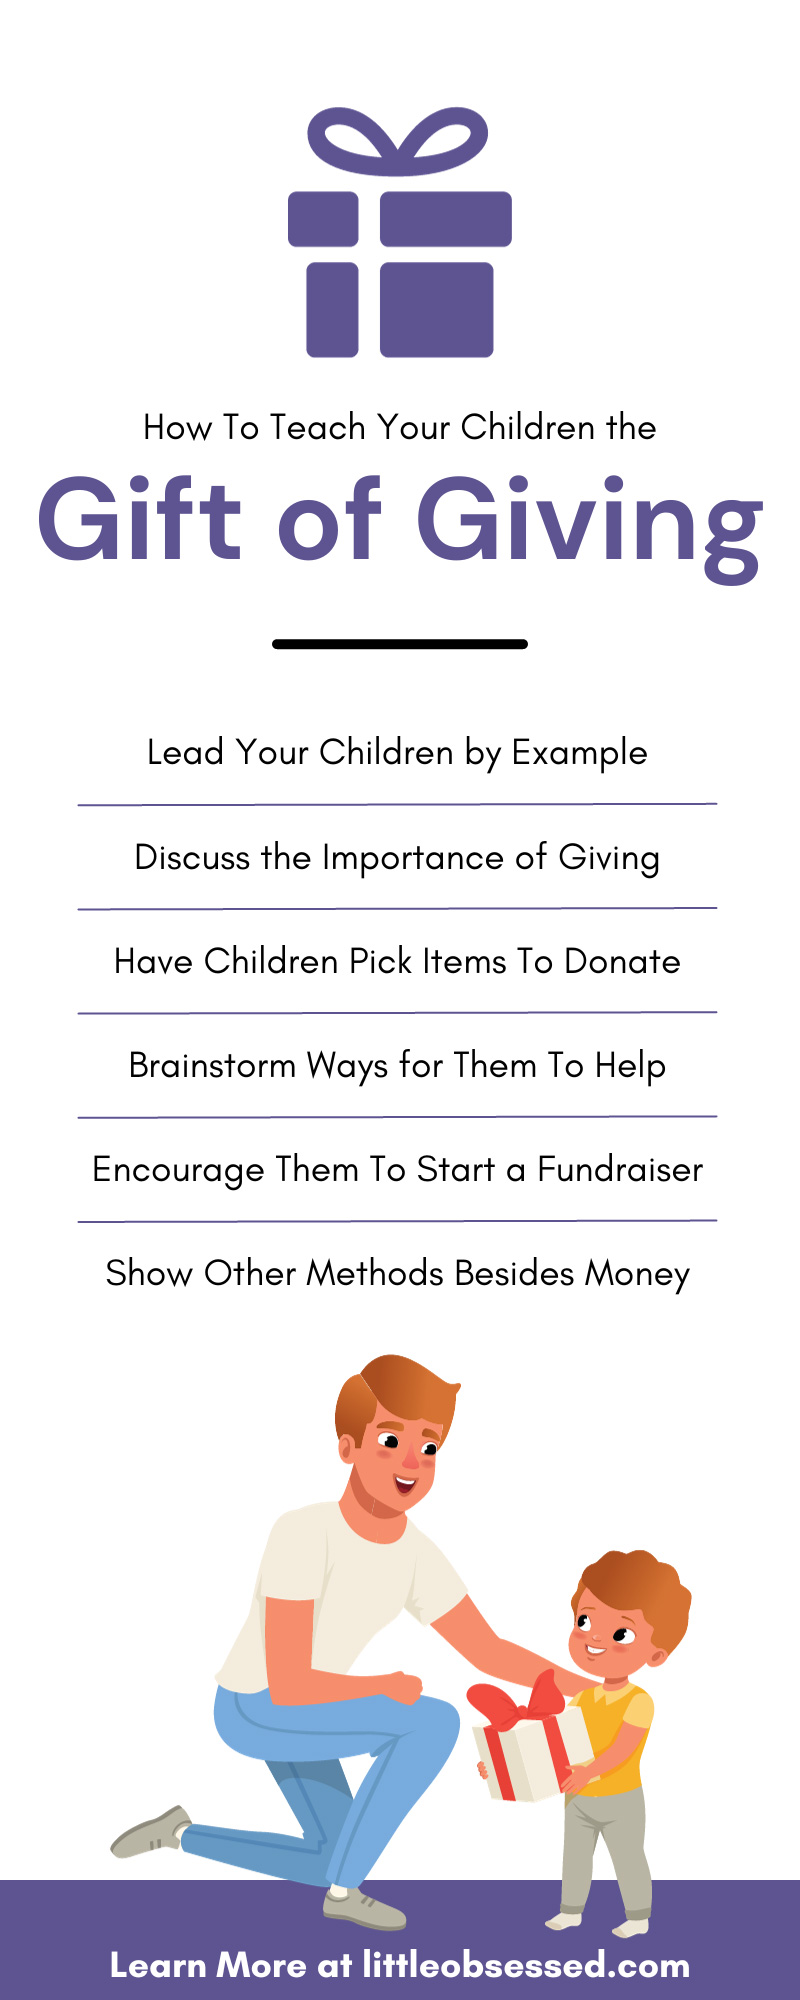 How To Teach Your Children the Gift of Giving